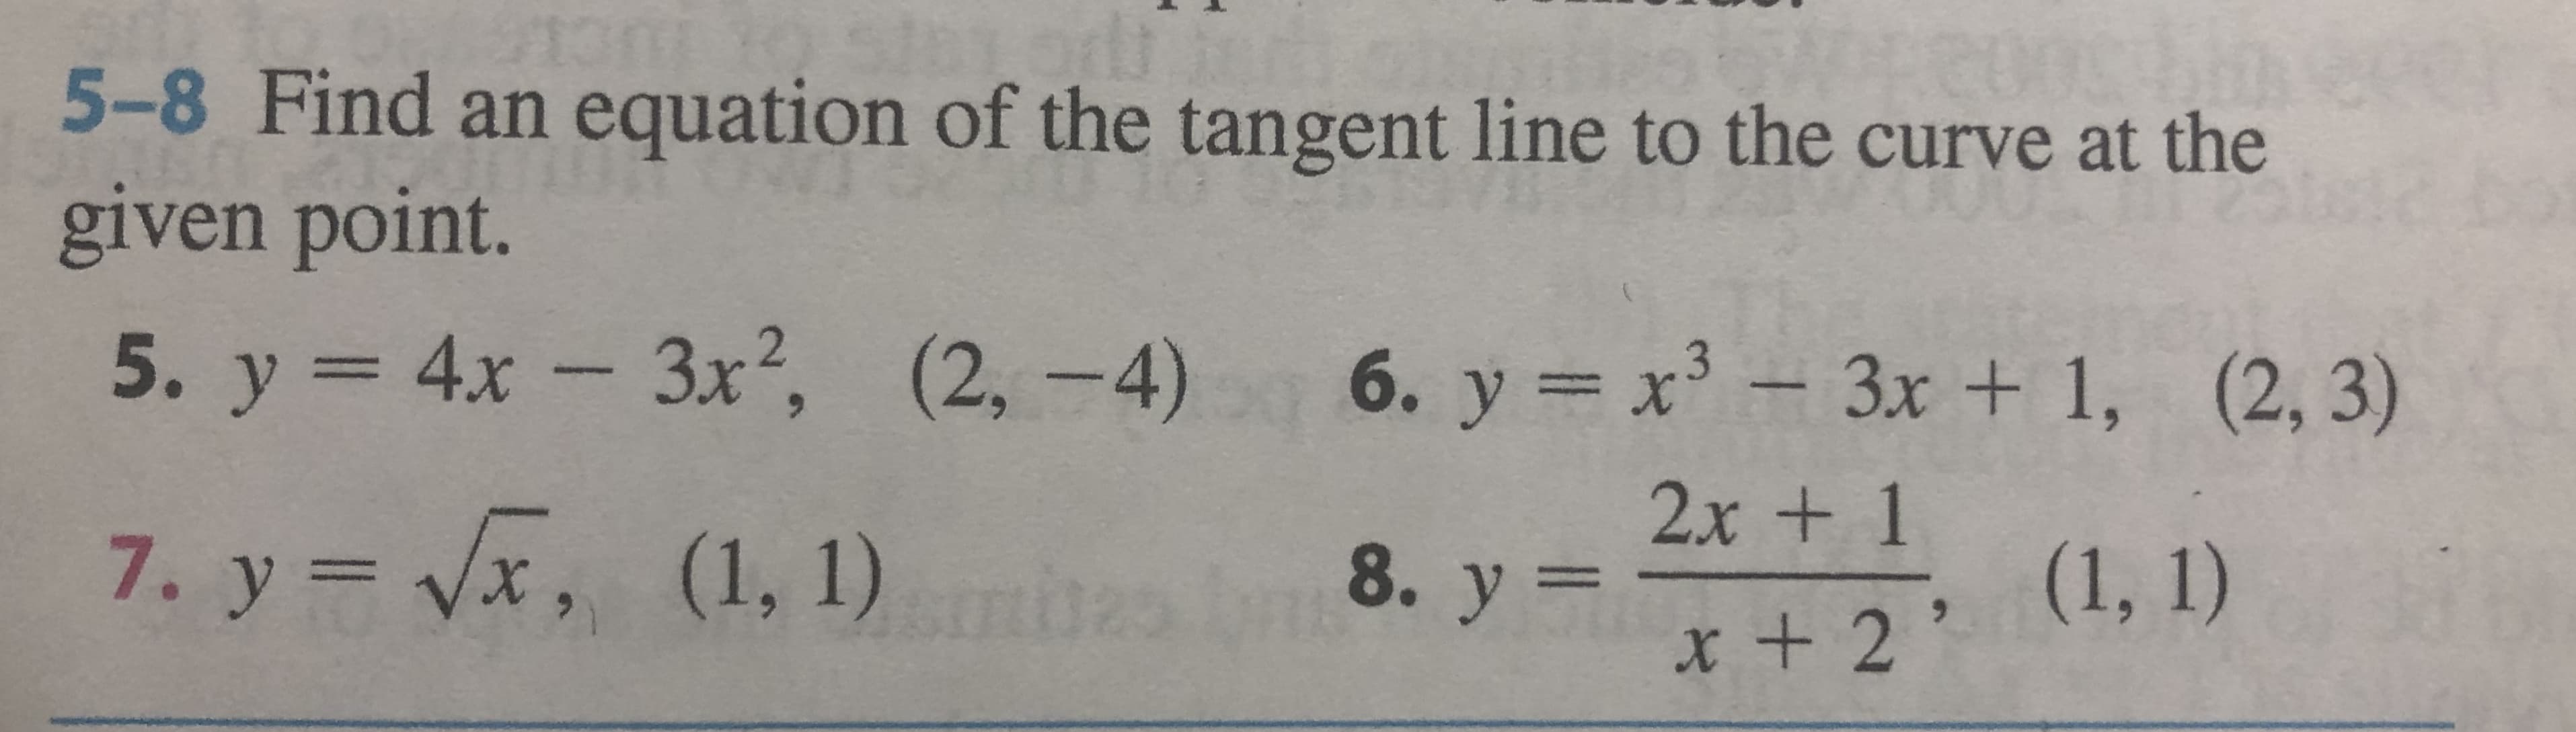 CU
5-8 Find an equation of the tangent line to the curve at the
given point.
5. y 4x- 3x, (2, -4)
- 3x2,
6. y x3-3x + 1, (2, 3)
2x + 1
7. y vx, (1, 1)
(1, 1)
8. у 3
x + 2
